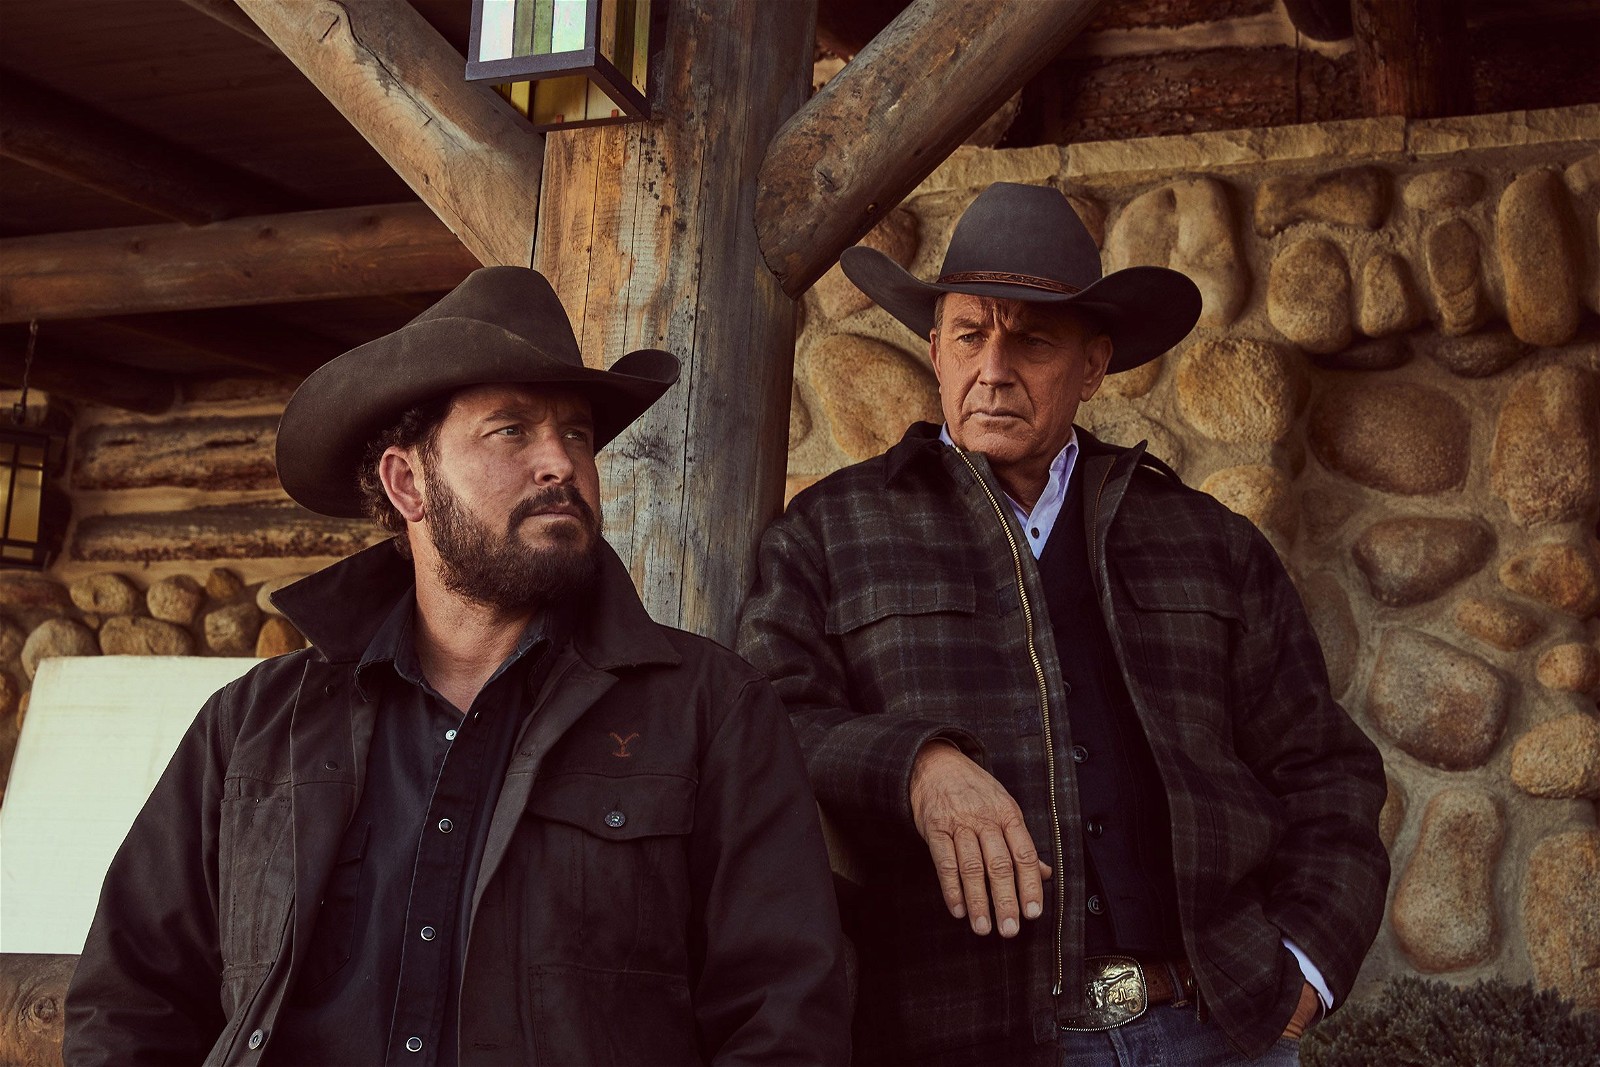 Kevin Costner and co-star Cole Hauser in a still from Taylor Sheridan's Yellowstone